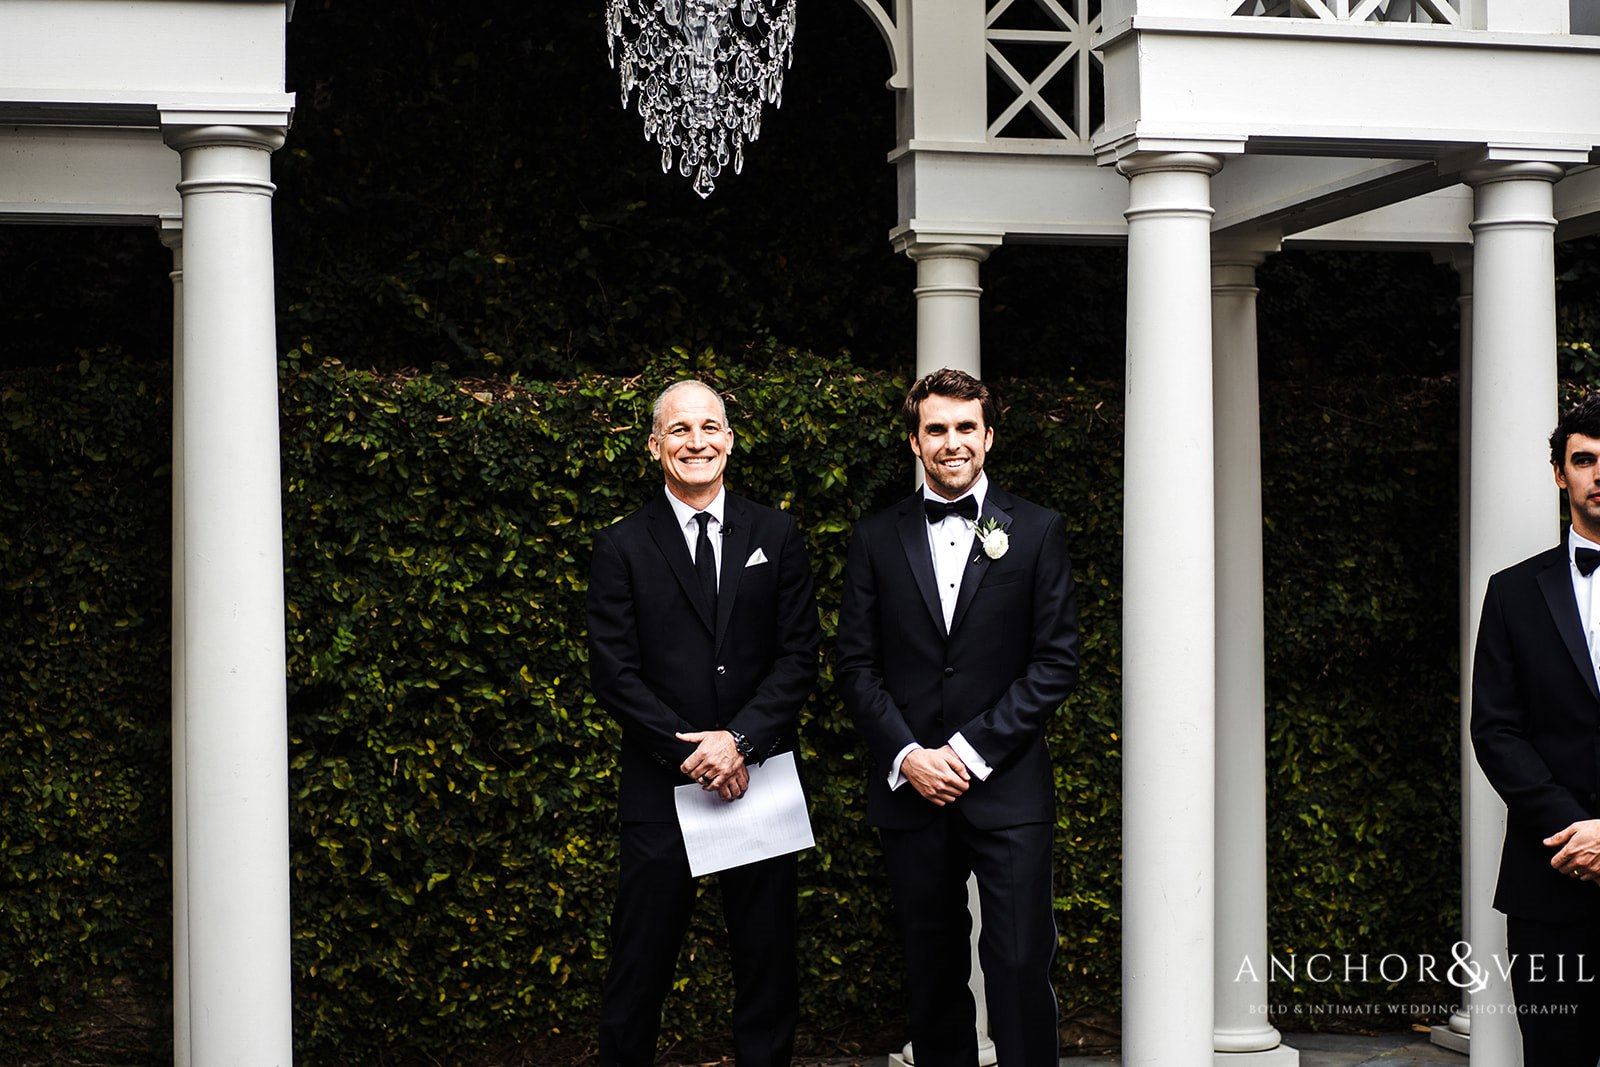 The groom with his friend that married the couple at the William Aiken House Wedding